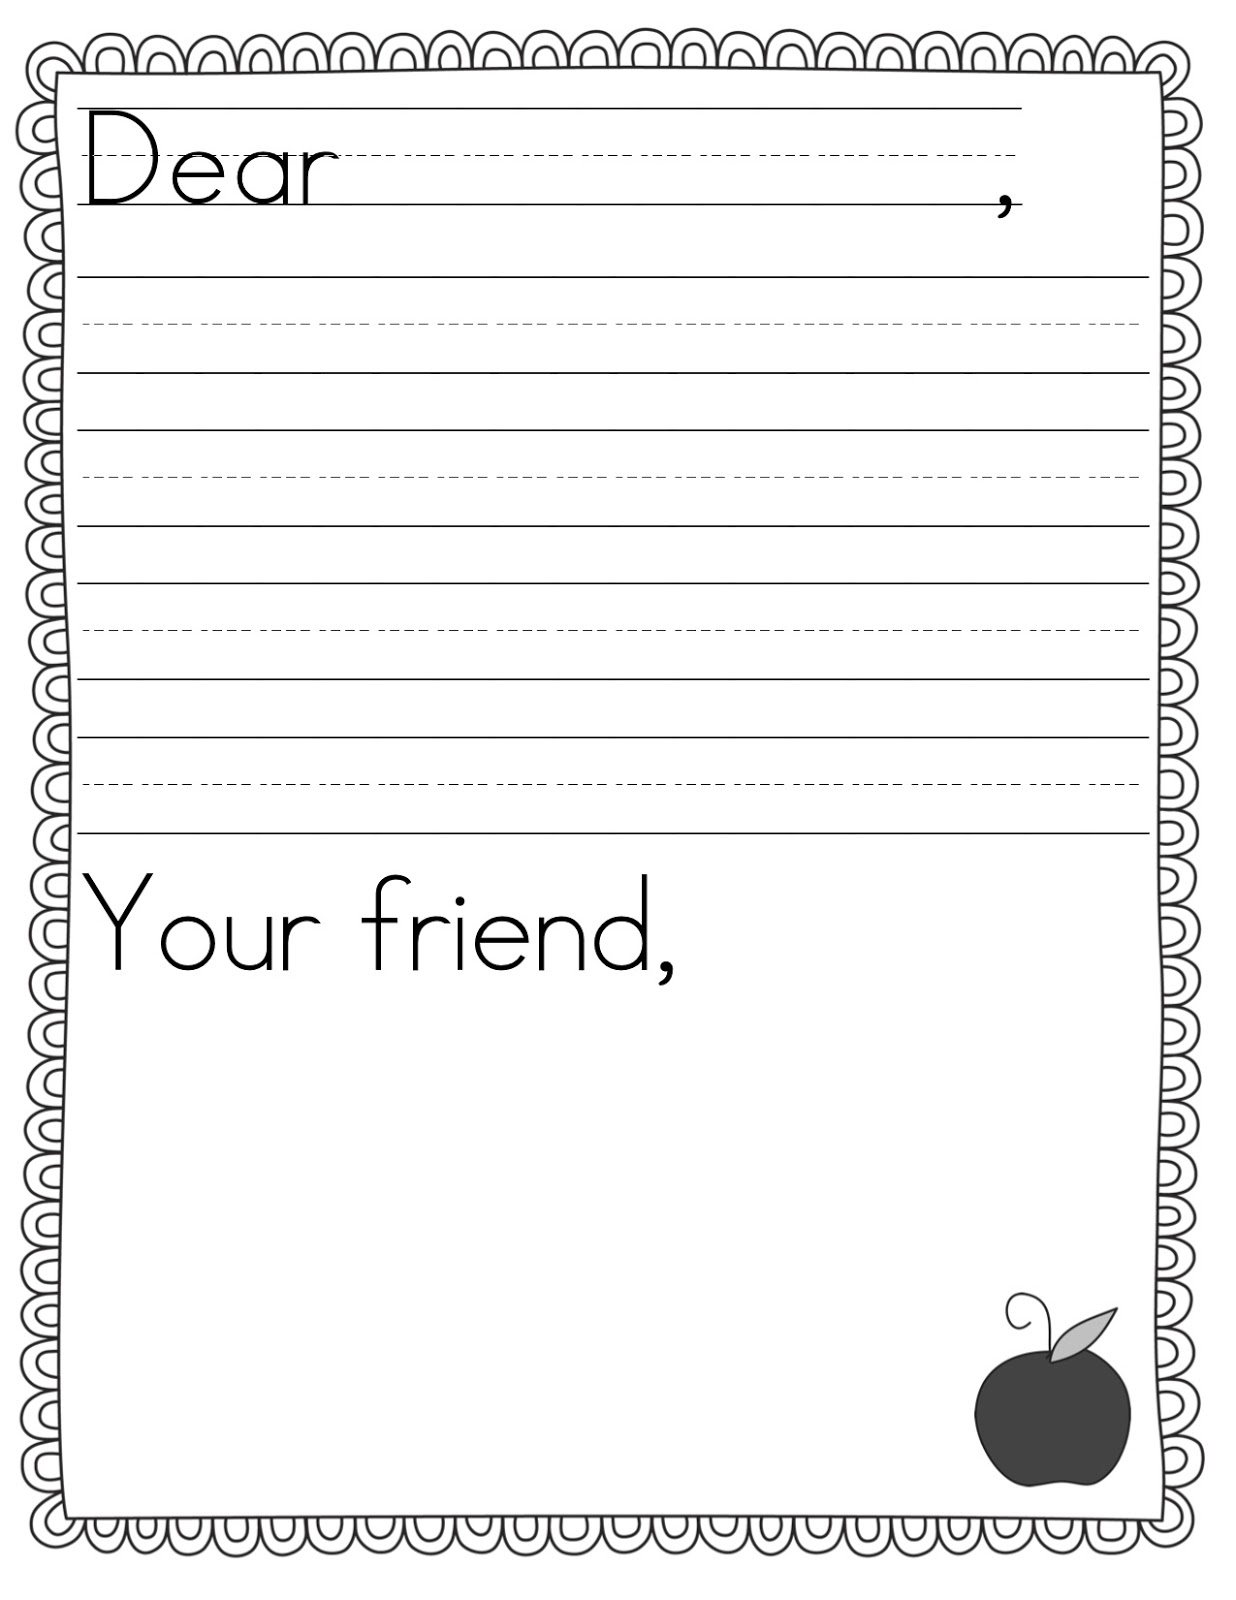 Kids Letter Writing Campaign — Urban Homestead Foundation With Blank Letter Writing Template For Kids